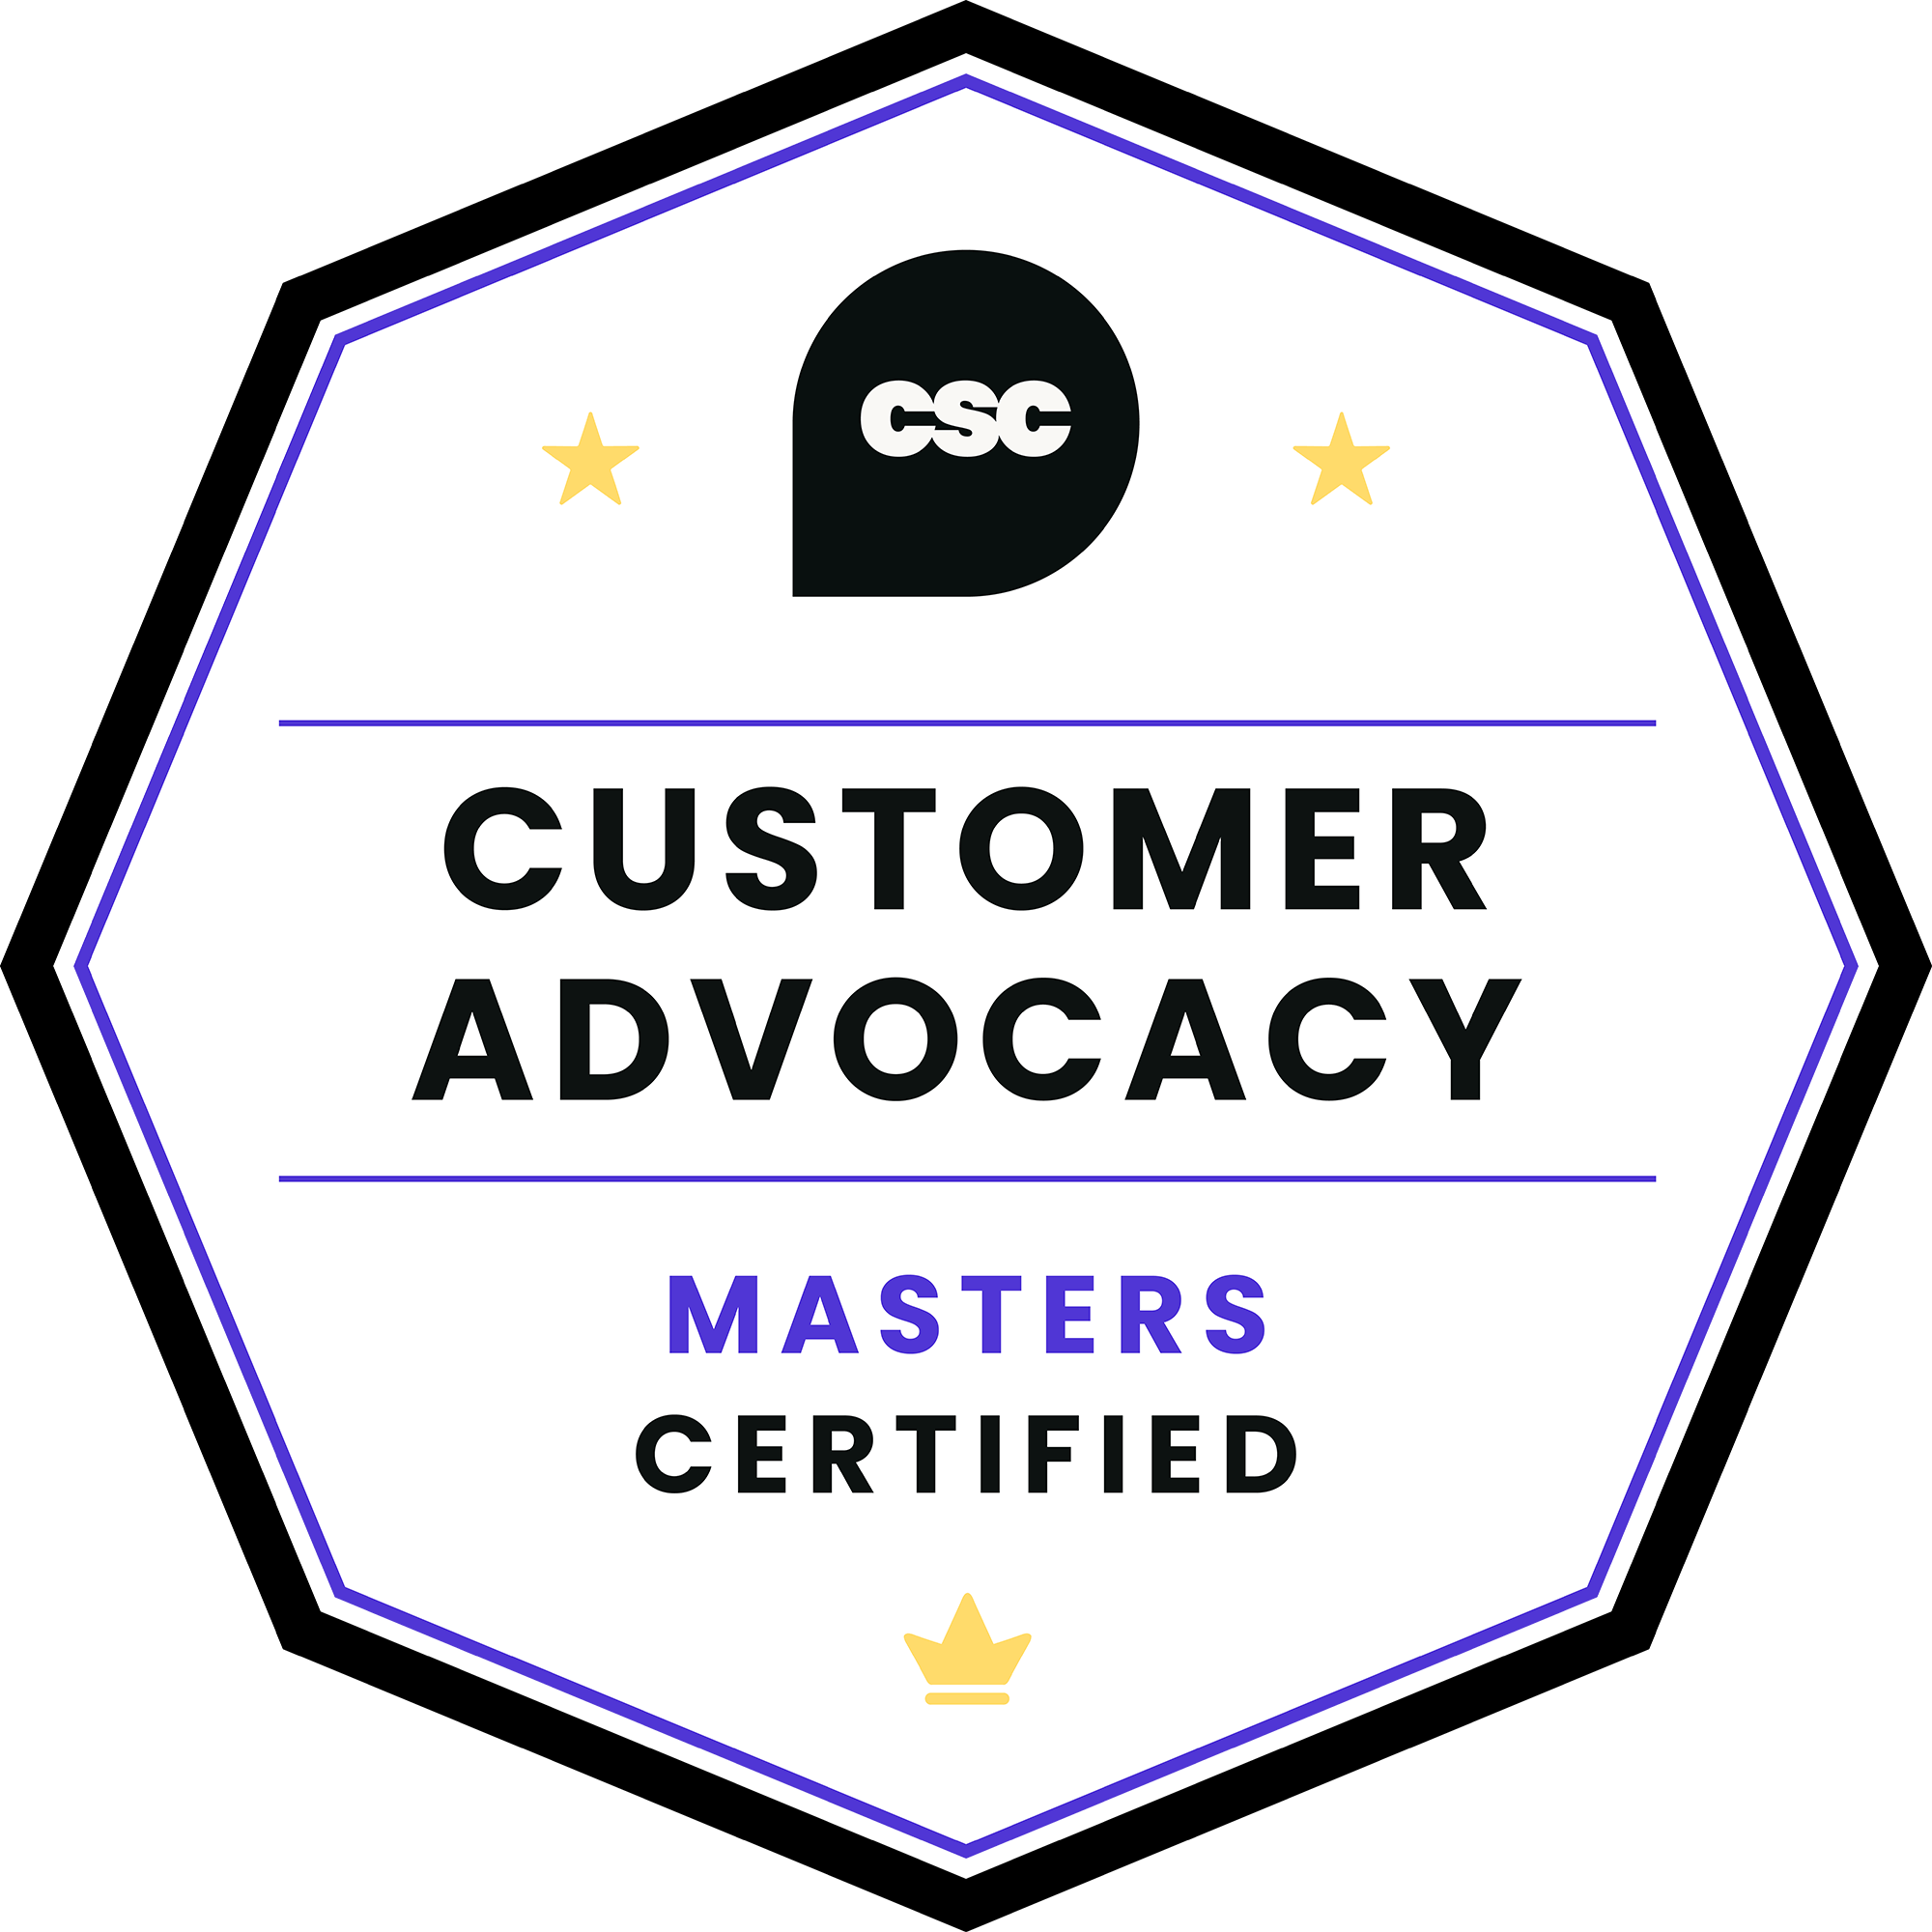 Customer Advocacy Certified | Masters badge